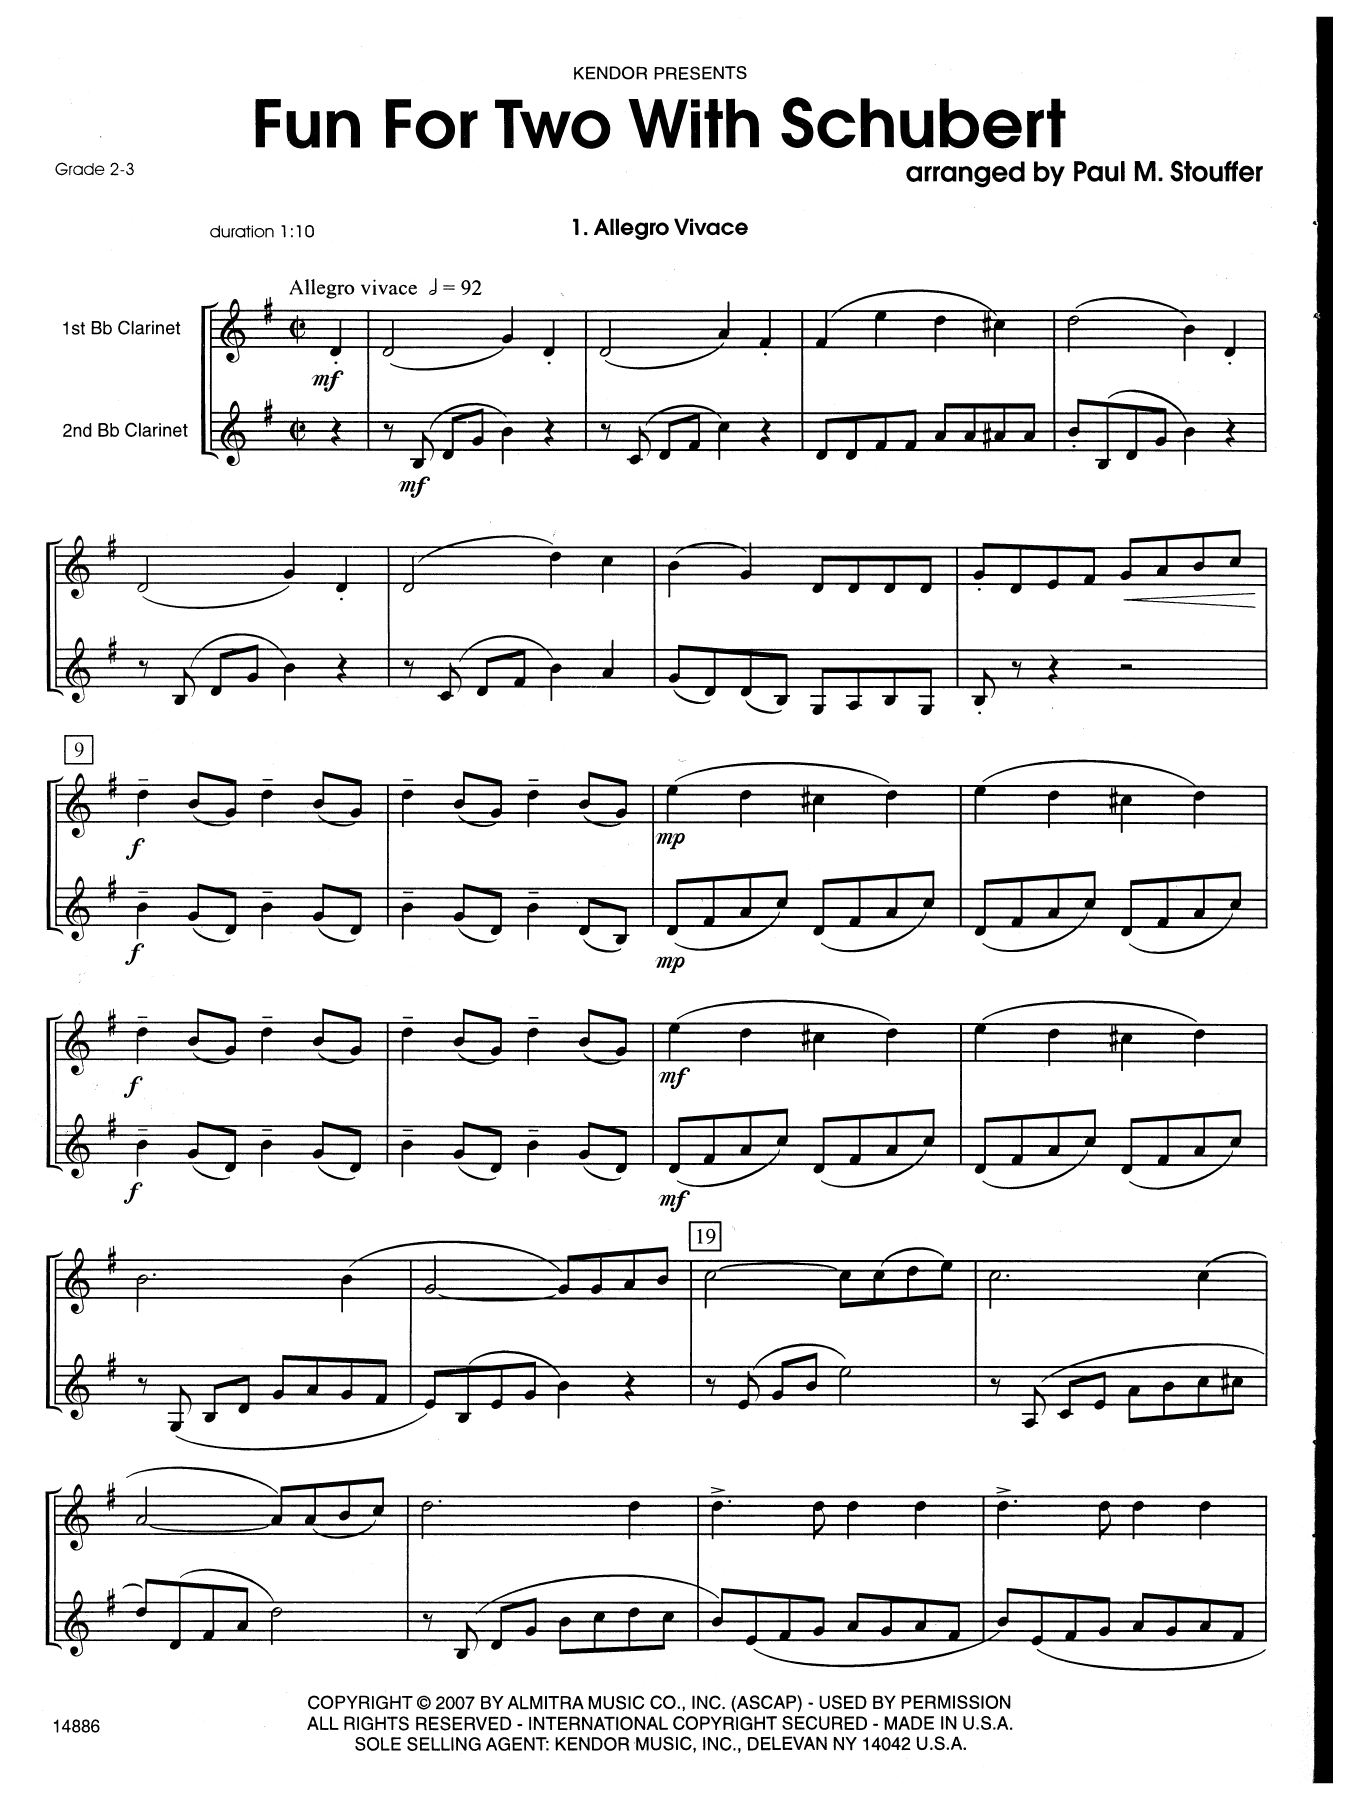 Download Paul M. Stouffer Fun For Two With Schubert Sheet Music